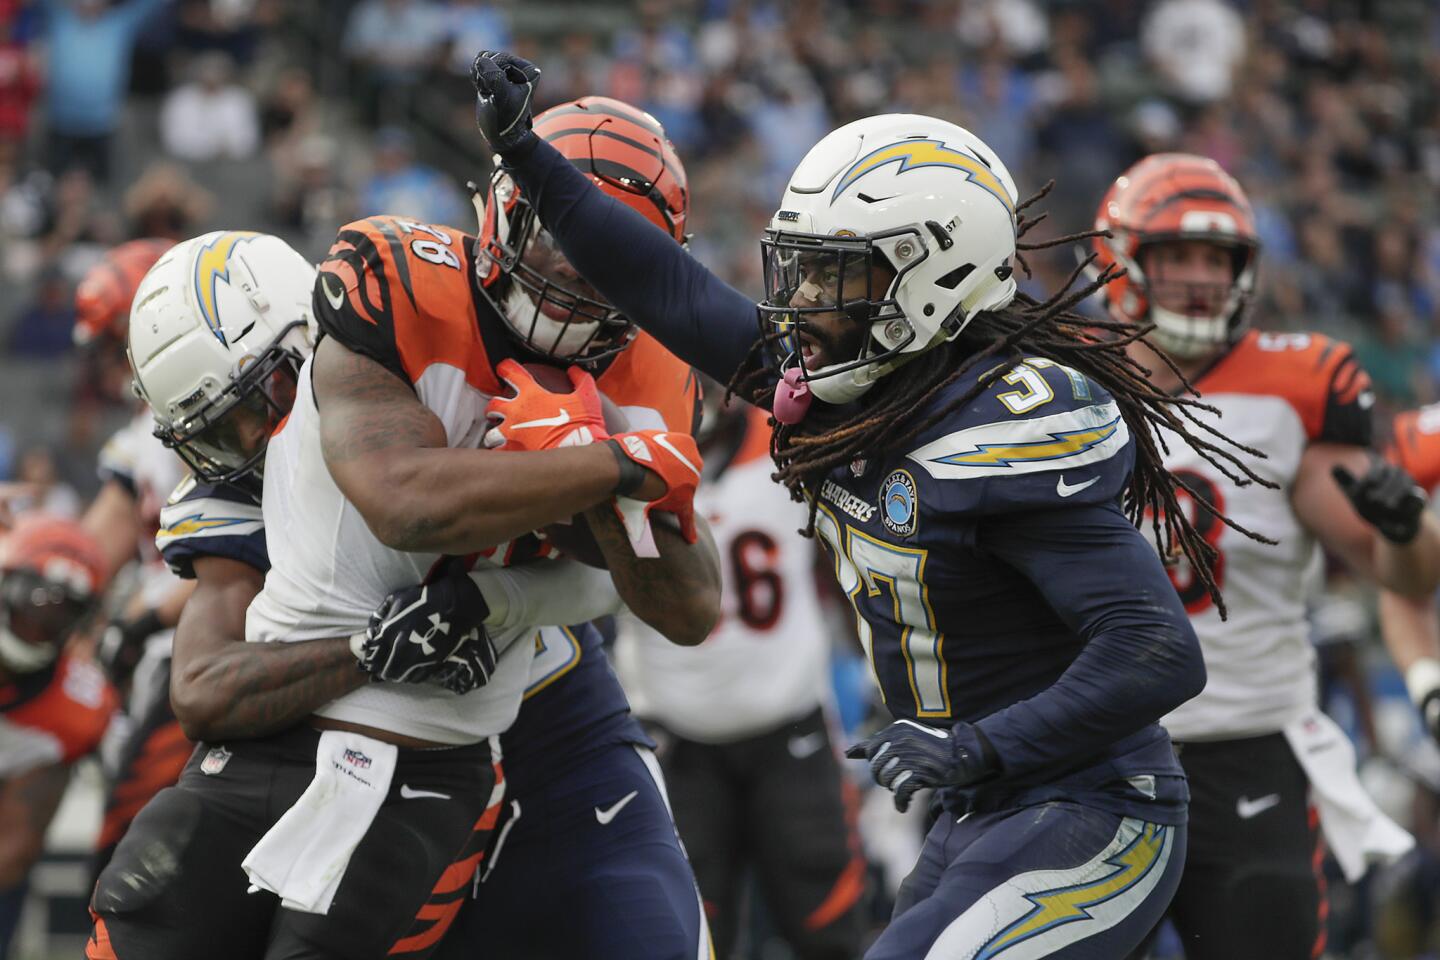 Chargers safety Jahleel Addae celebrates as Bengals running back Joe Mixon is stopped short of a first down on a fourth-down run iduring the third quarter.